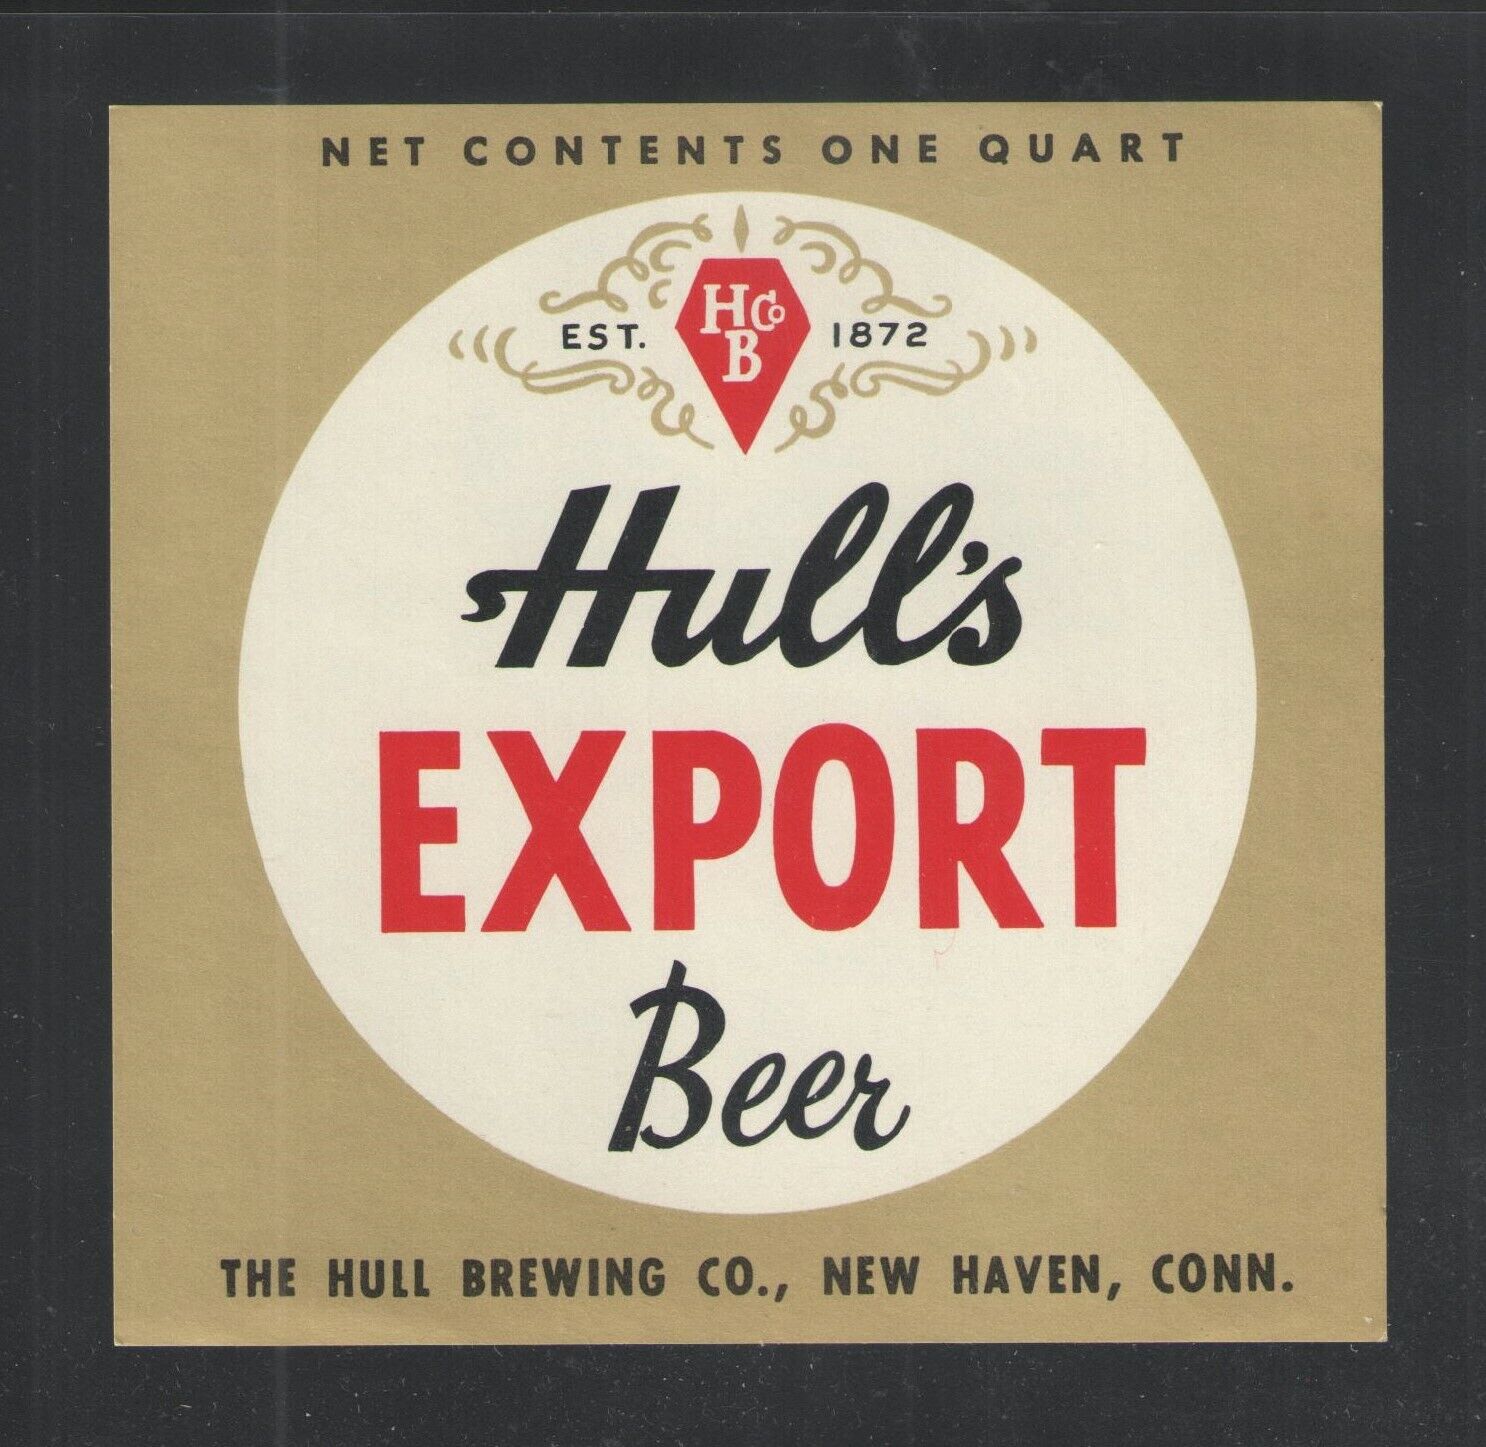 Hull's Export Beer 1 Quart Label New Haven Conn { Unused }